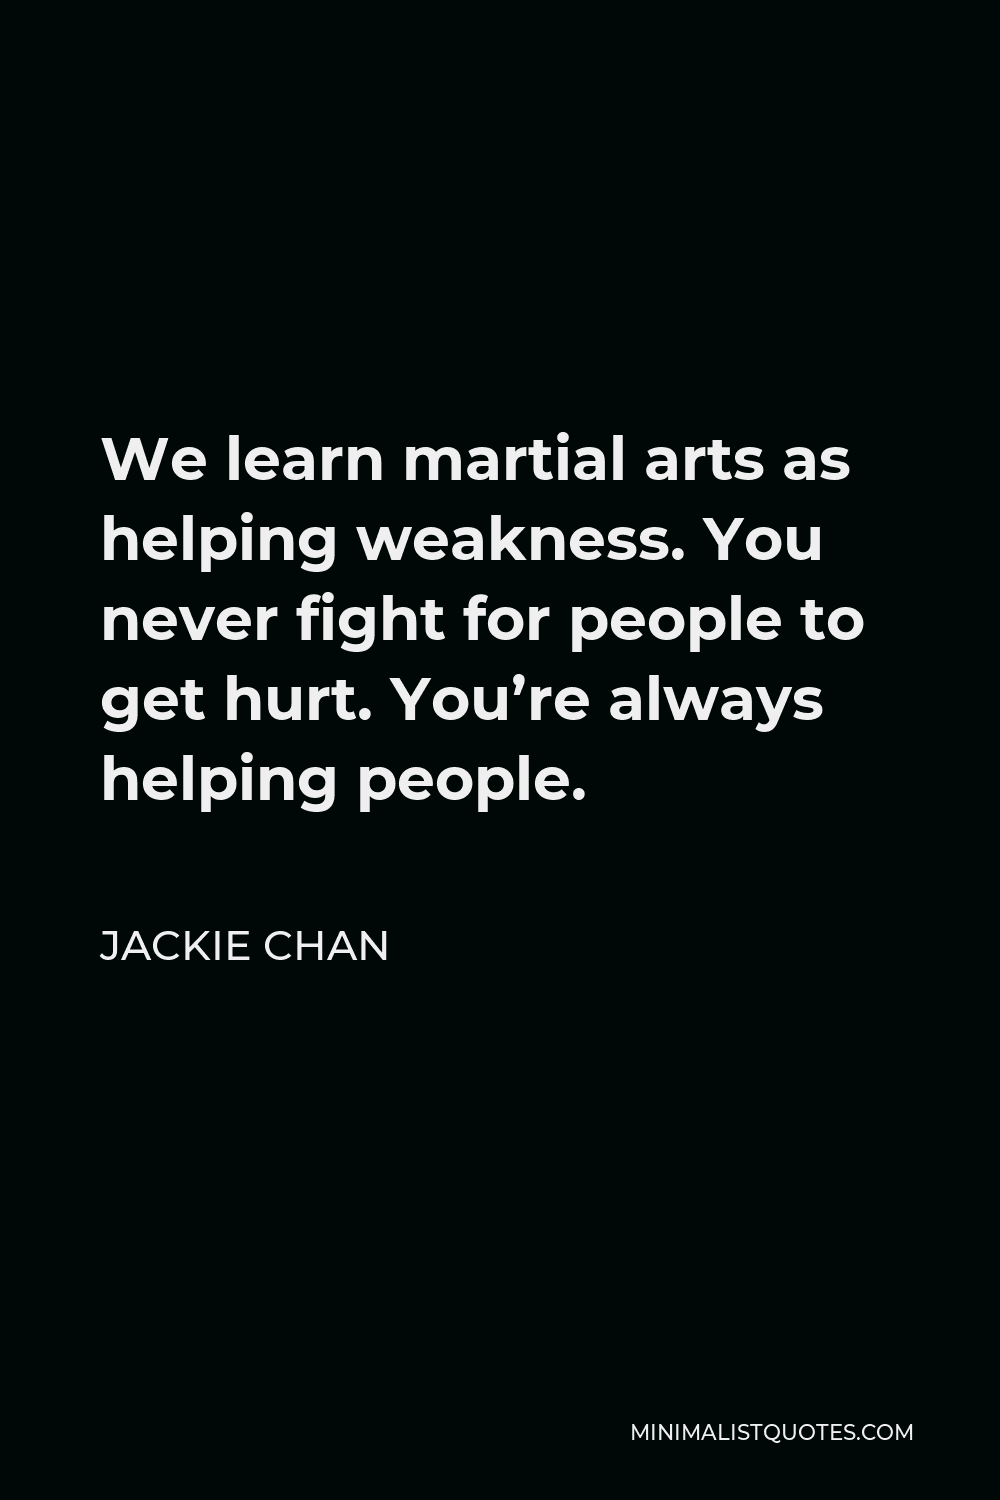 Jackie Chan Quote - We learn martial arts as helping weakness. You never fight for people to get hurt. You’re always helping people.